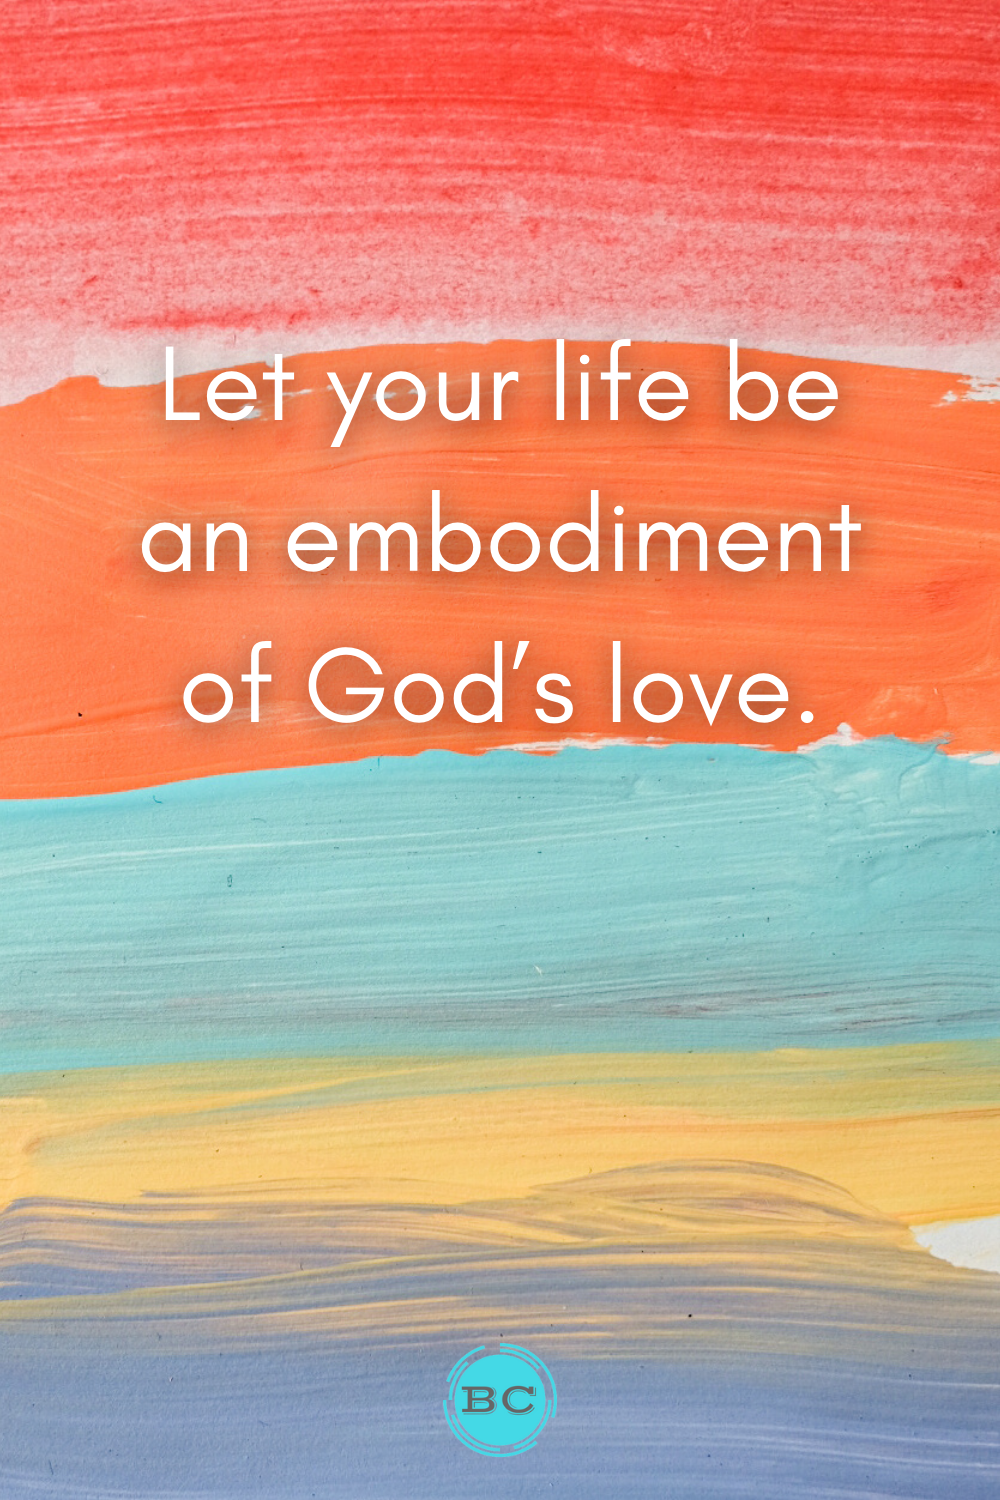 Let your life be an embodiment of God’s love. parable of the samaritan quote